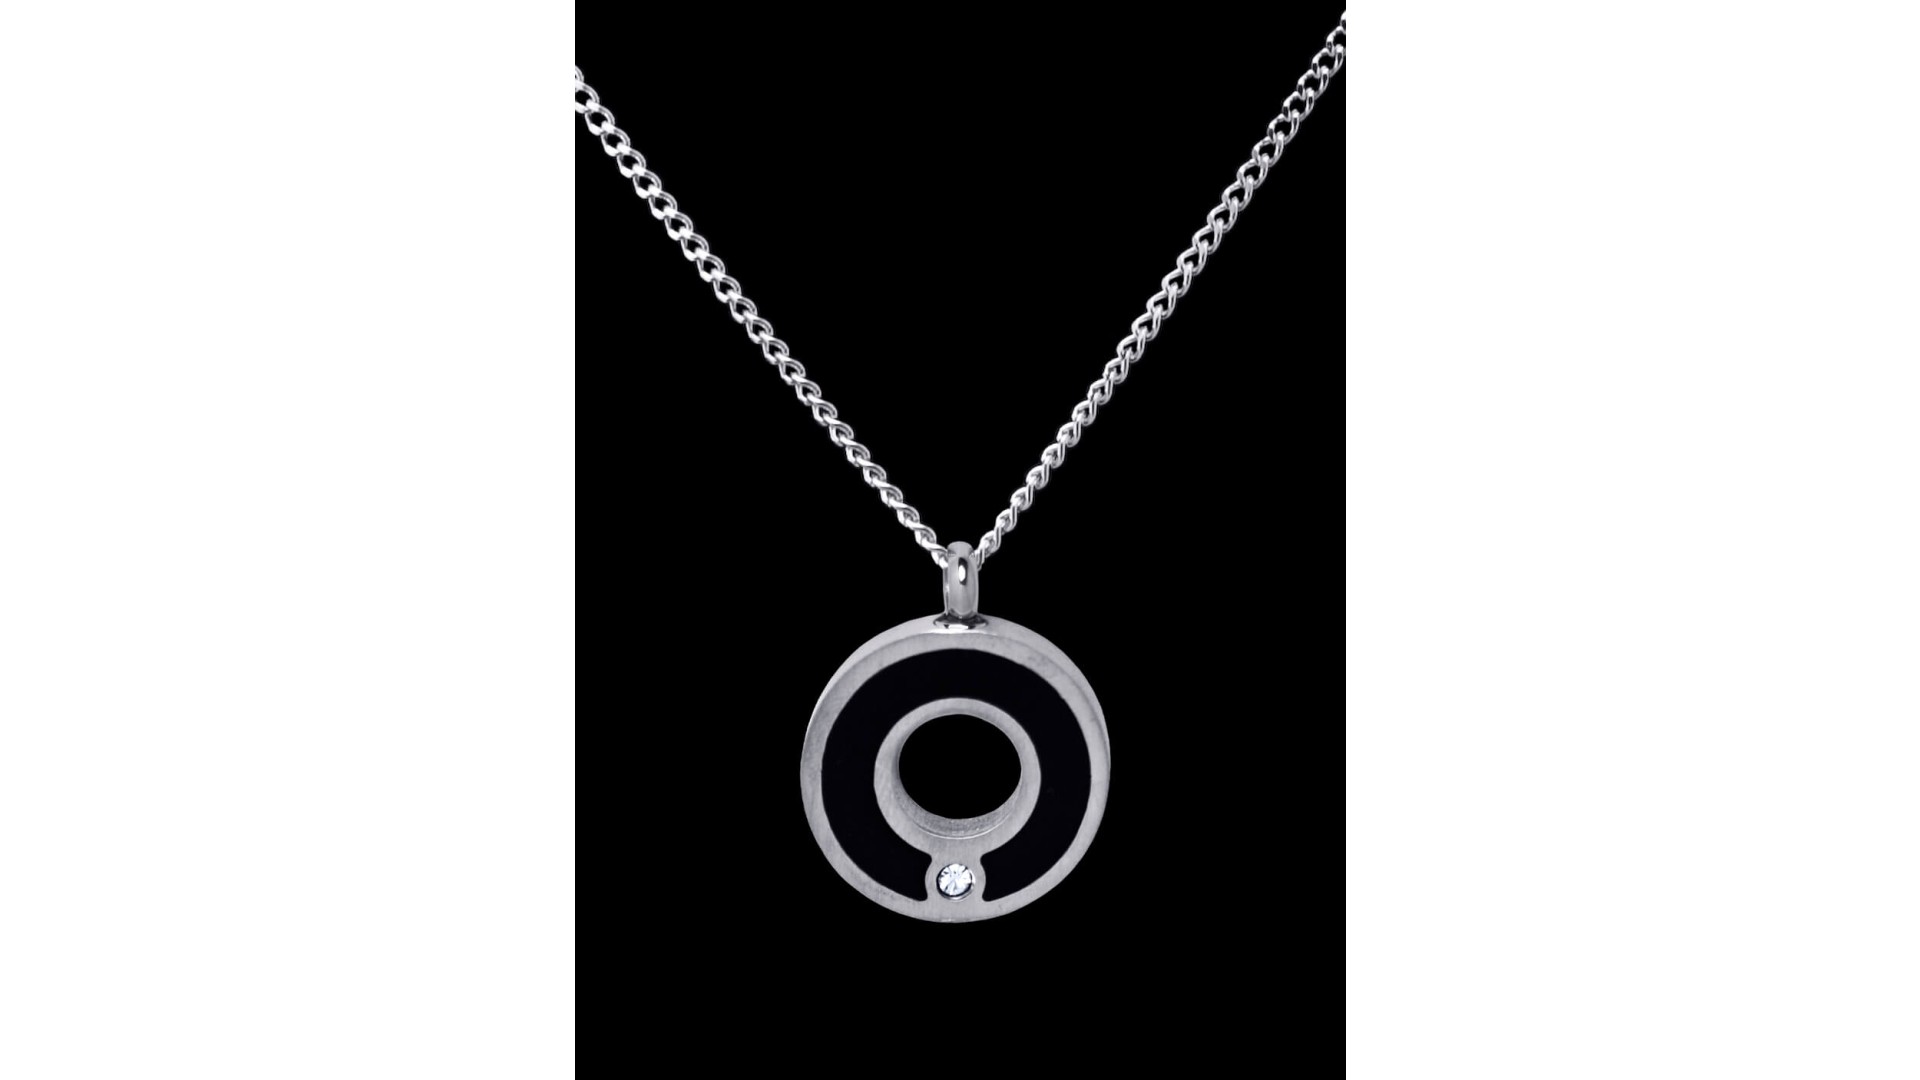 Stainless Steel Silver-Black Circle Cremation Pendant #36-615